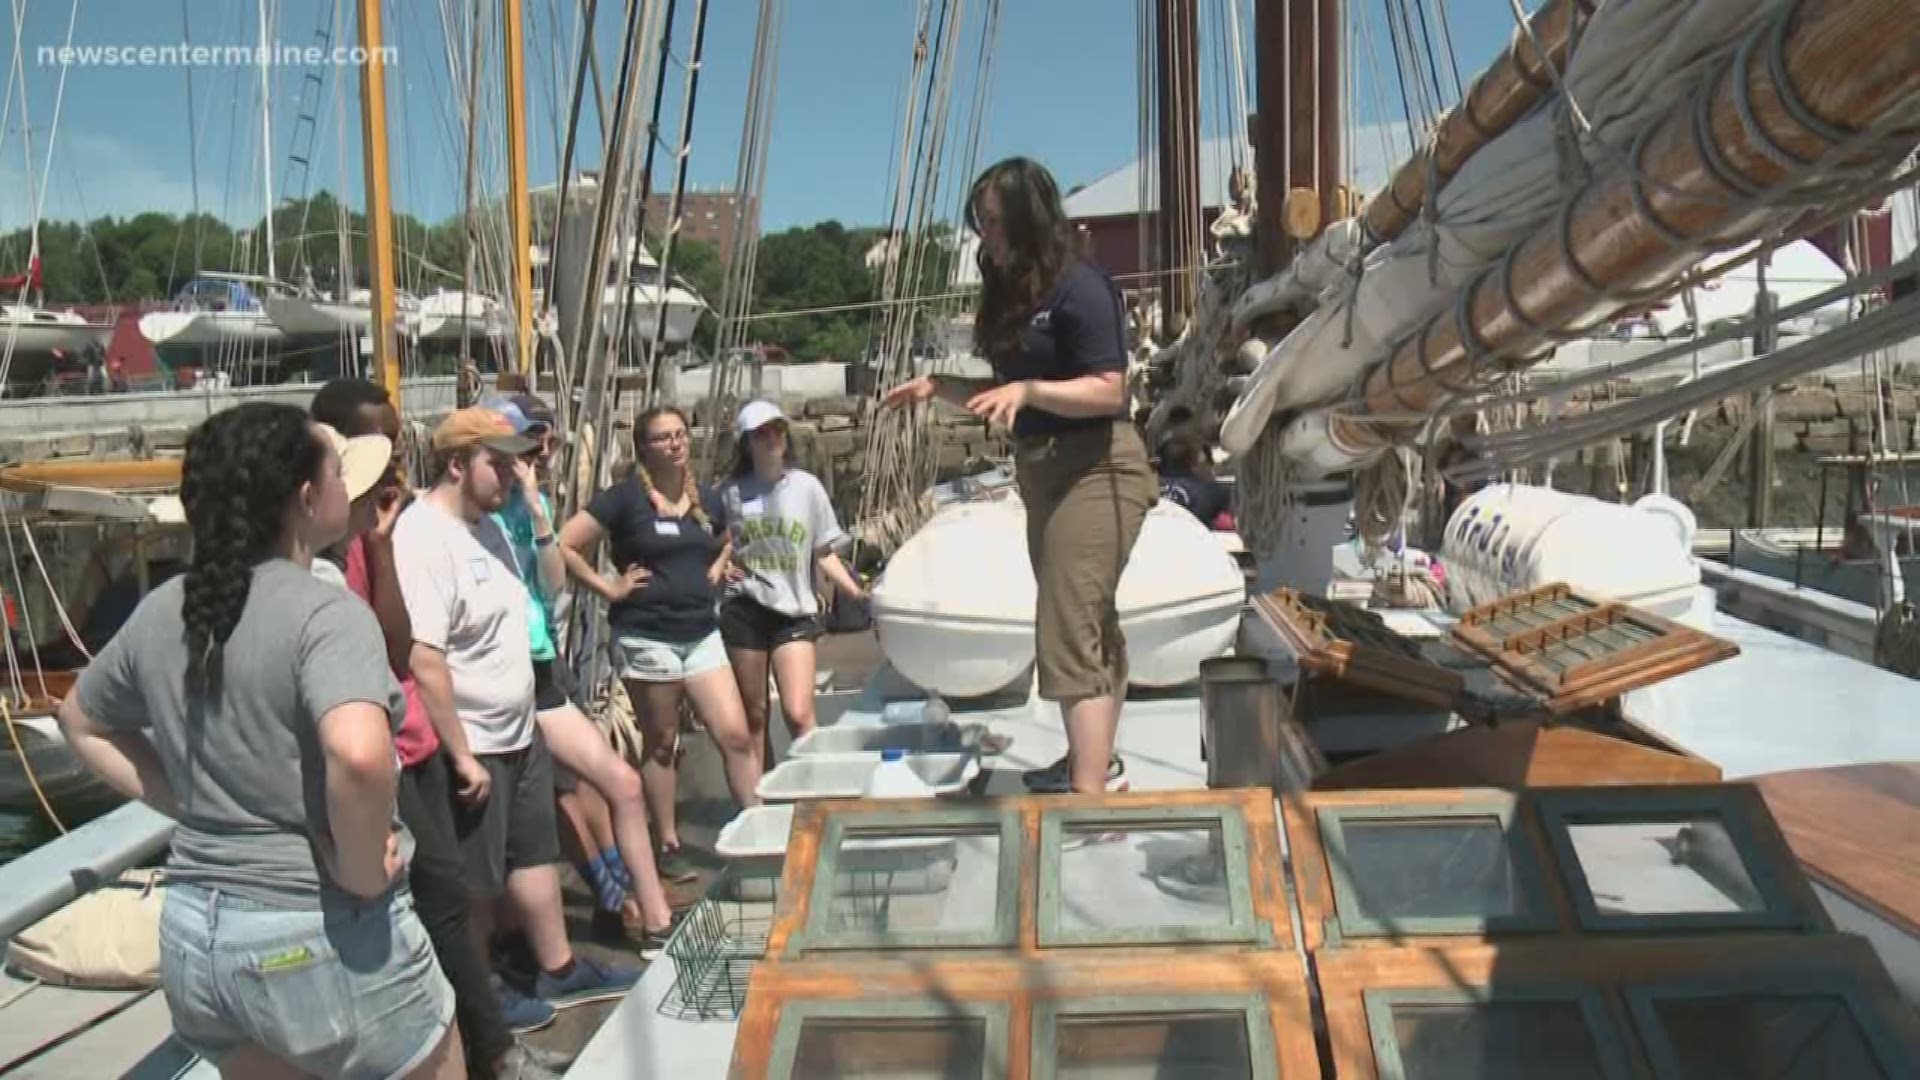 Tall Ships Maine provides a program for Maine high school students to learn about teamwork and sailing while out at sea.